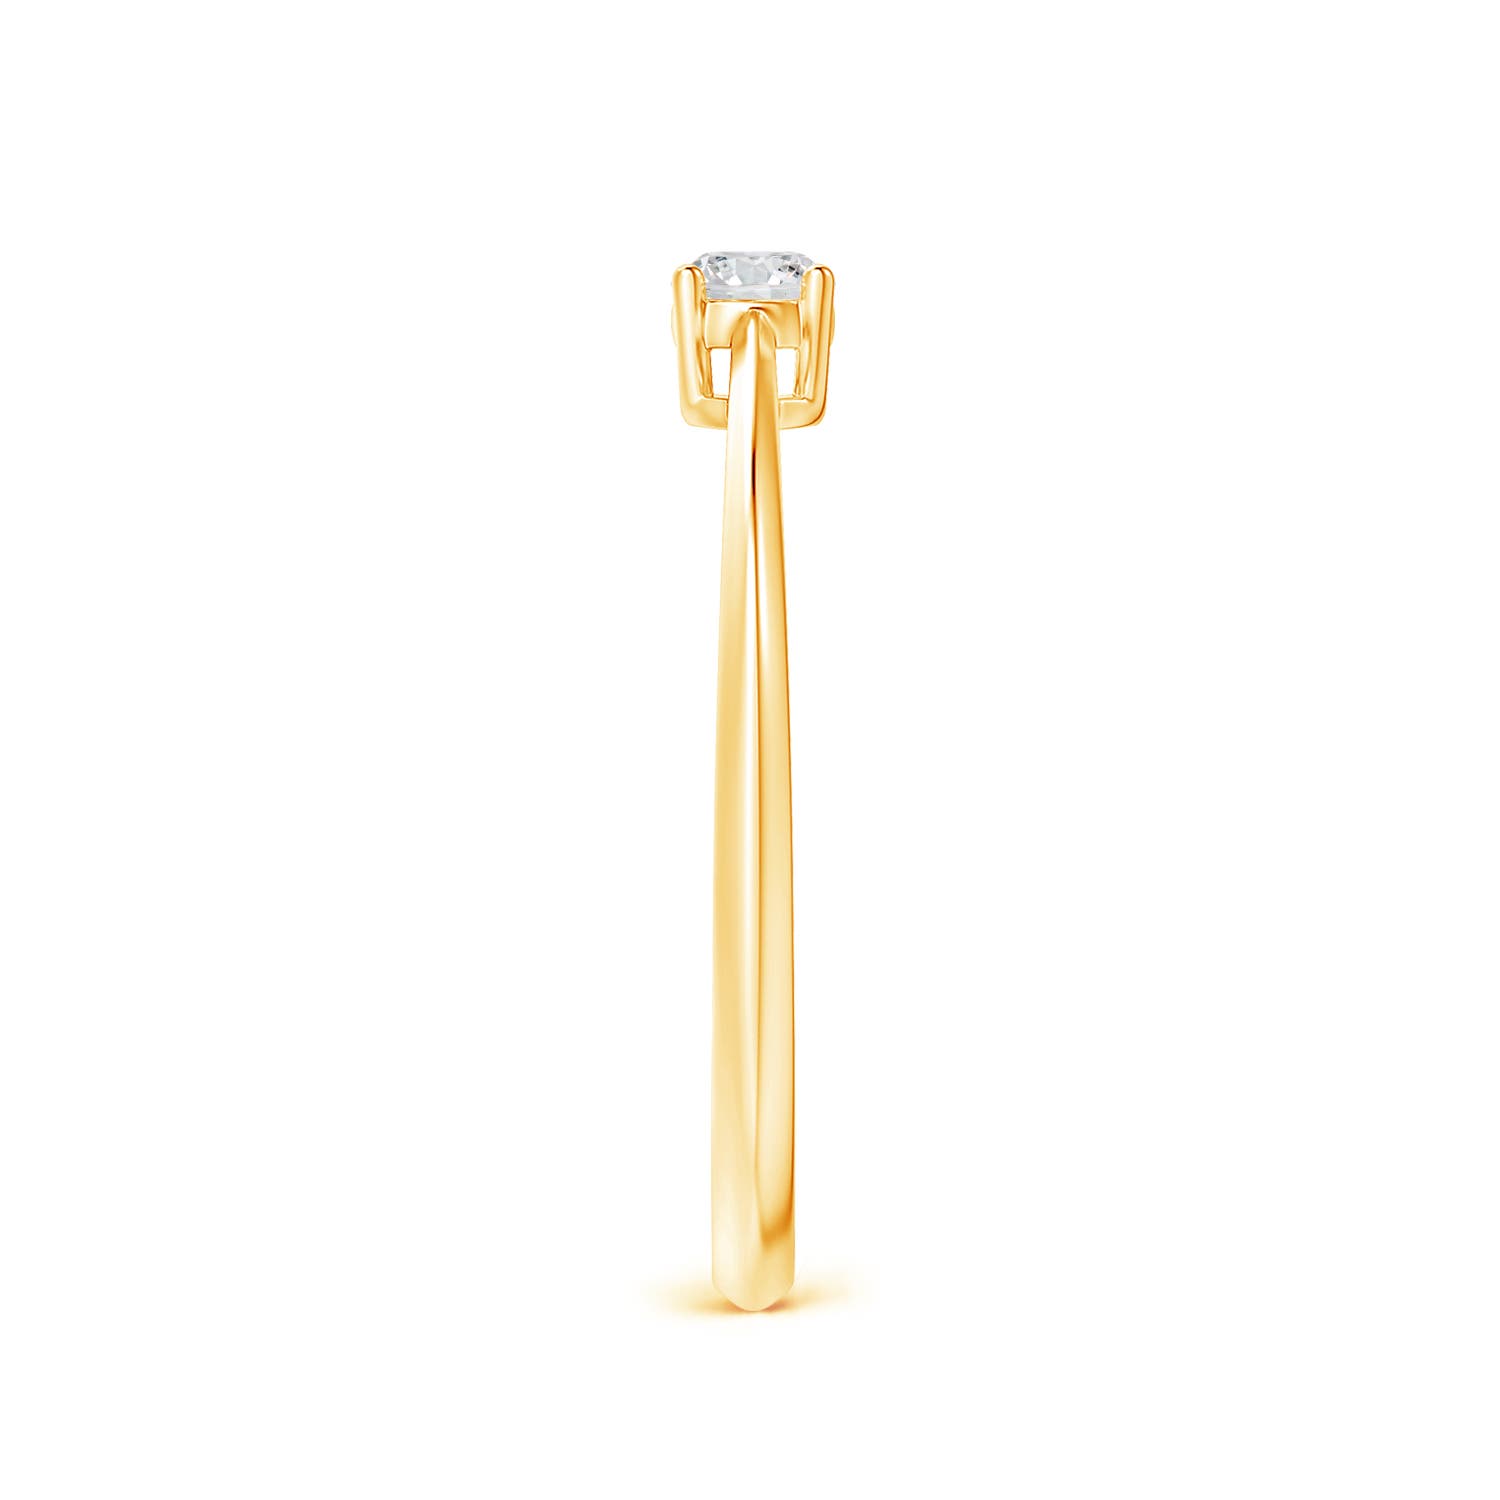 H, SI2 / 0.15 CT / 14 KT Yellow Gold